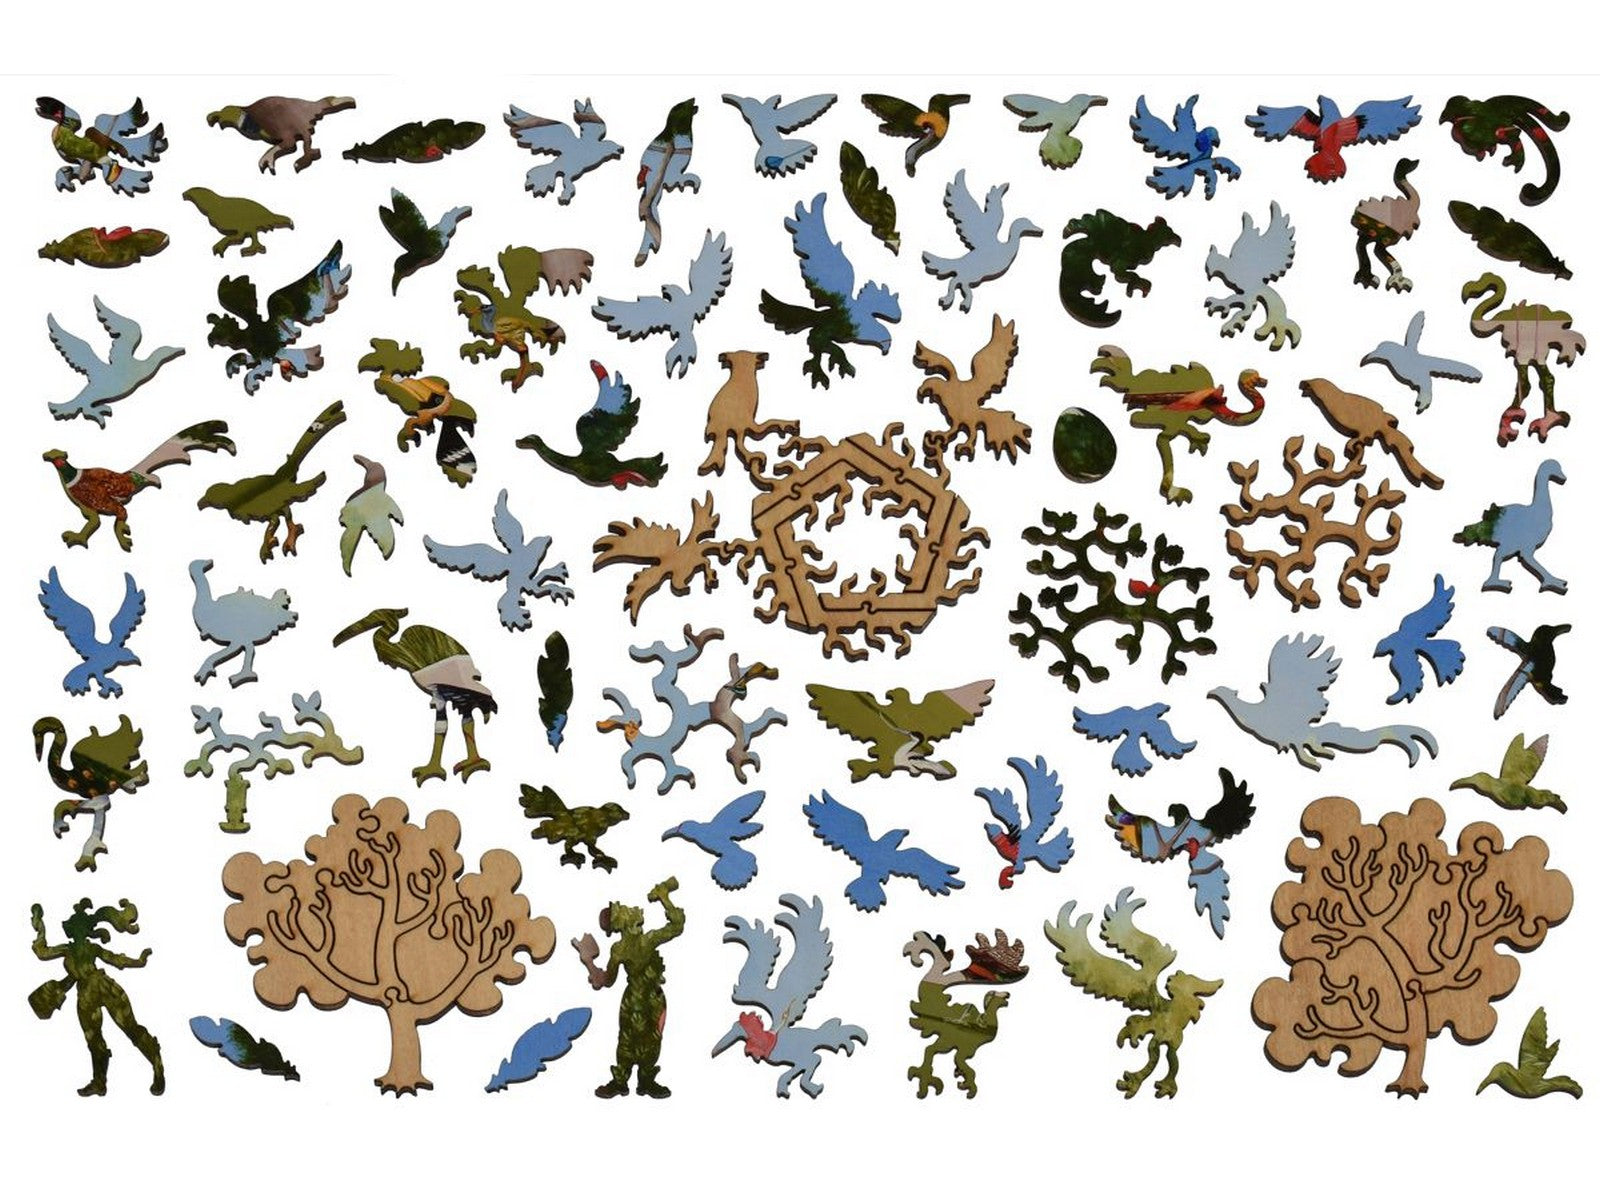 The whimsies that can be found in the puzzle, A Good Tree Can Lodge Ten Thousand Birds.